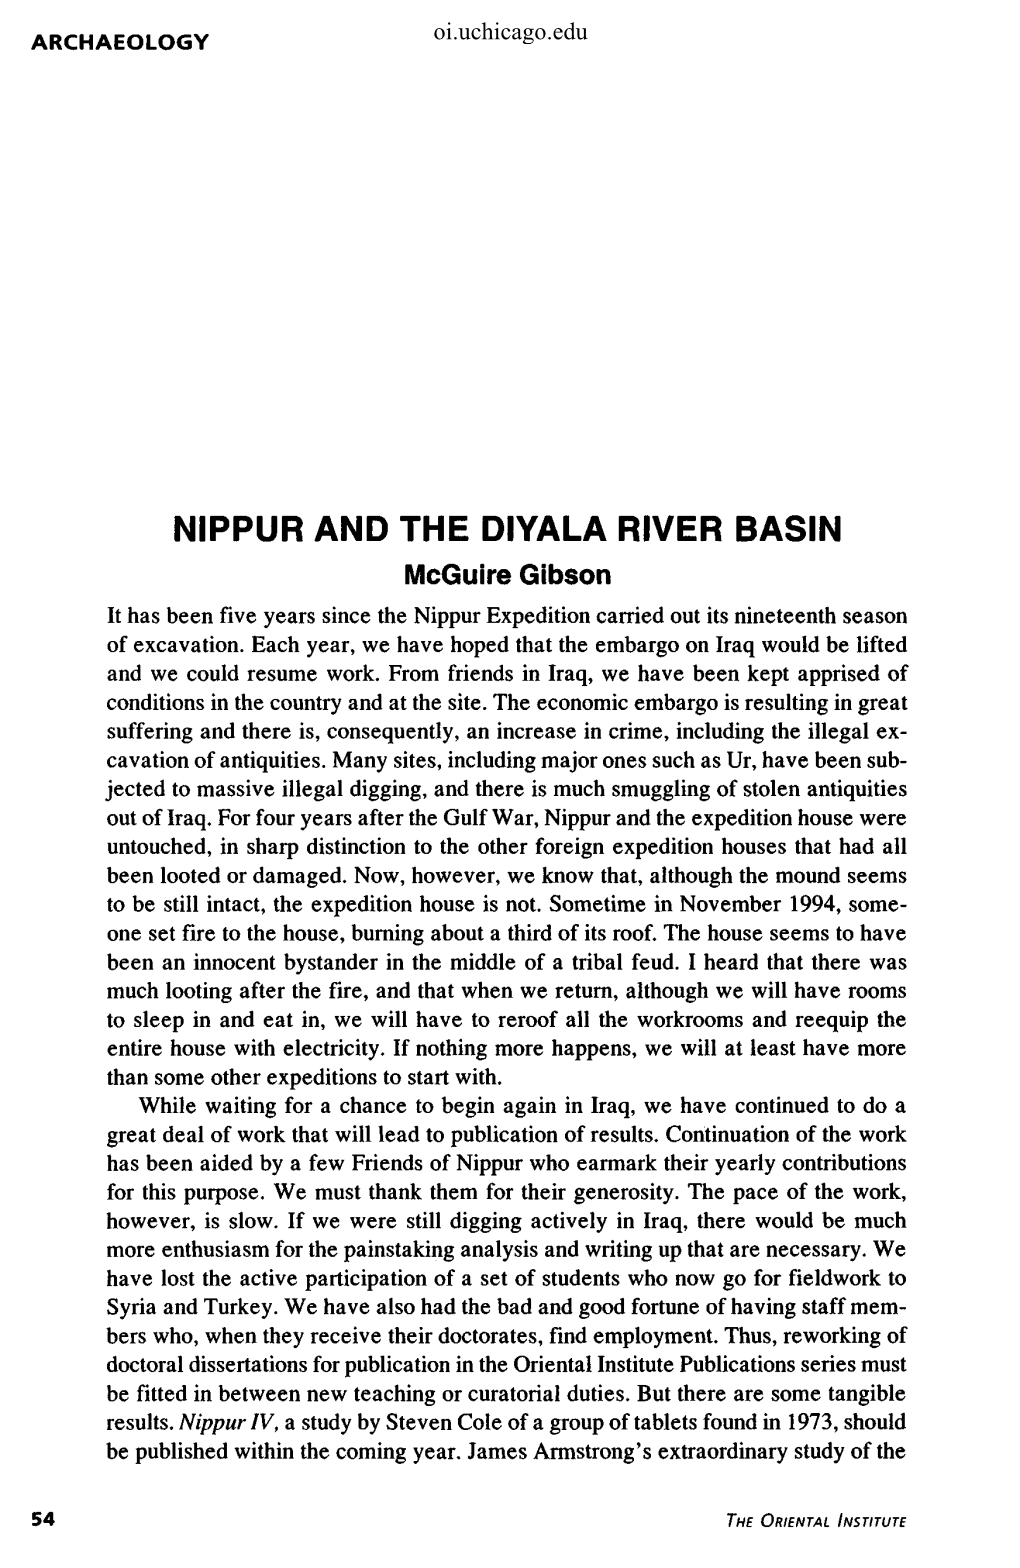 NIPPUR and the DIYALA RIVER BASIN Mcguire Gibson It Has Been Five Years Since the Nippur Expedition Carried out Its Nineteenth Season of Excavation